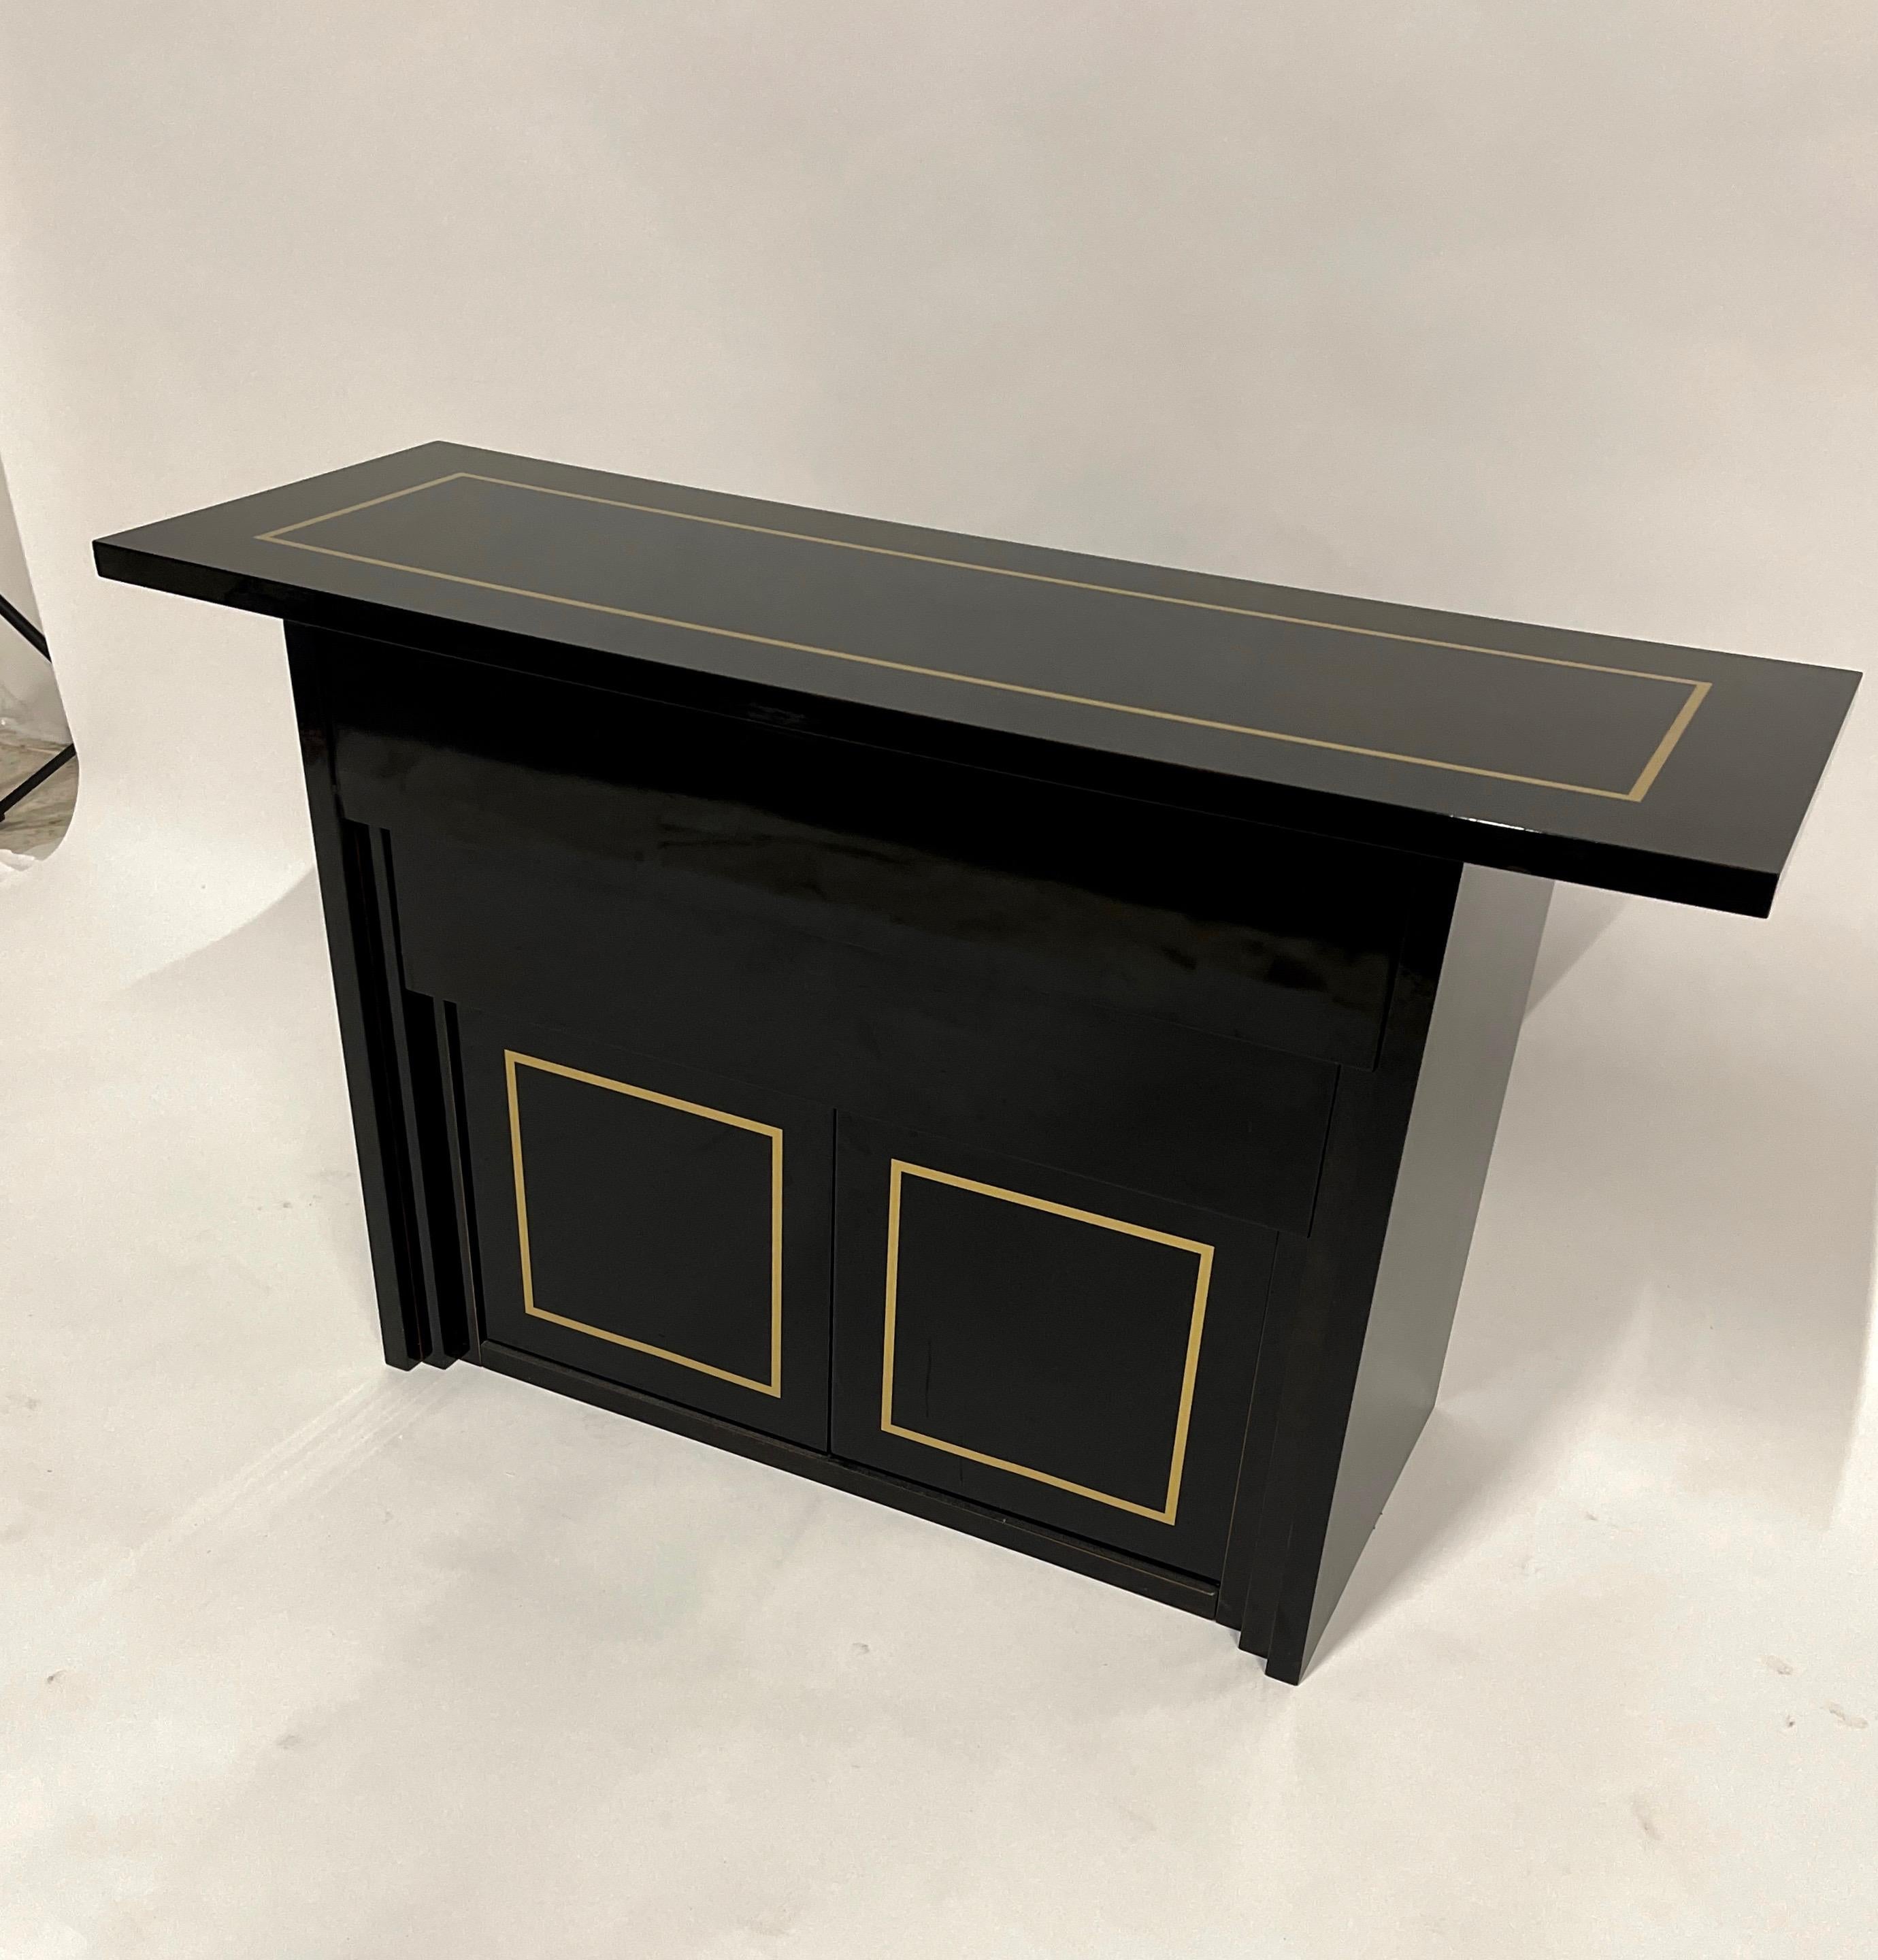 Lovely and versatile black lacquer piece. Would function well as a console, bar, buffet or credenza. Made in Italy.
2 graduated drawers and one large storage cabinet on bottom- size of opening on the bottom portion measures 31